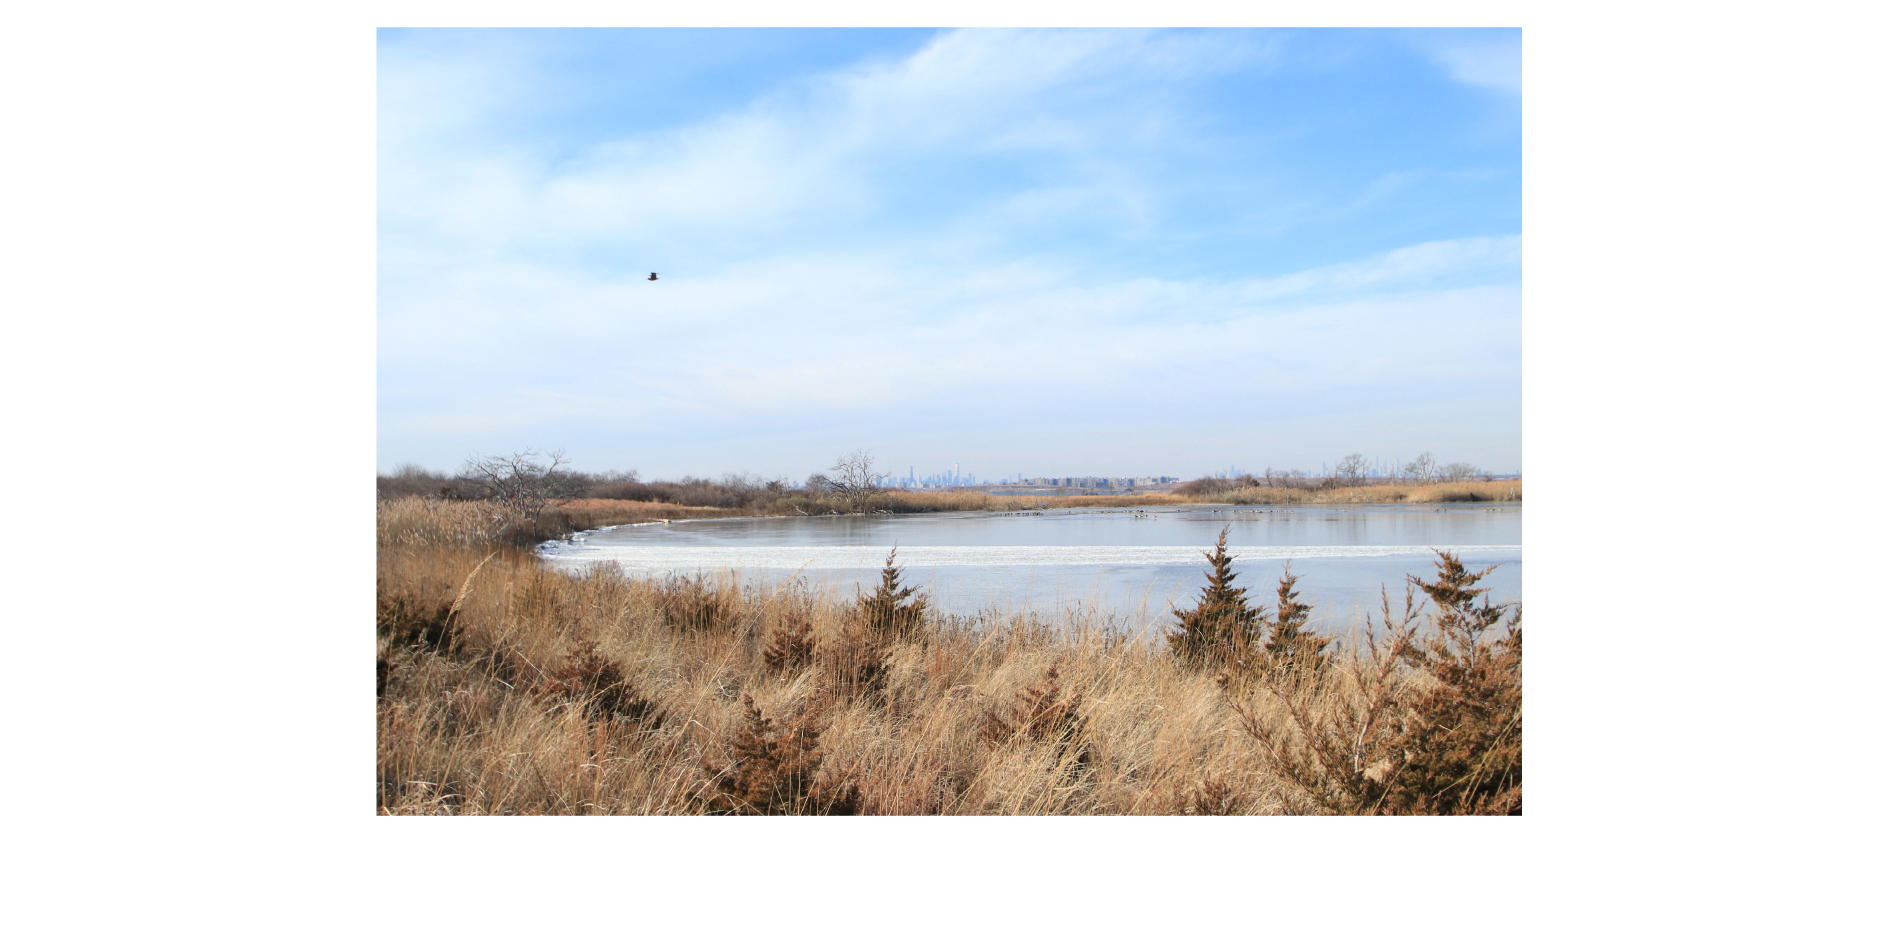 Living Shoreline: The project successfully created 9 new acres of tidal wetland and restored over 14 acres of habitat.